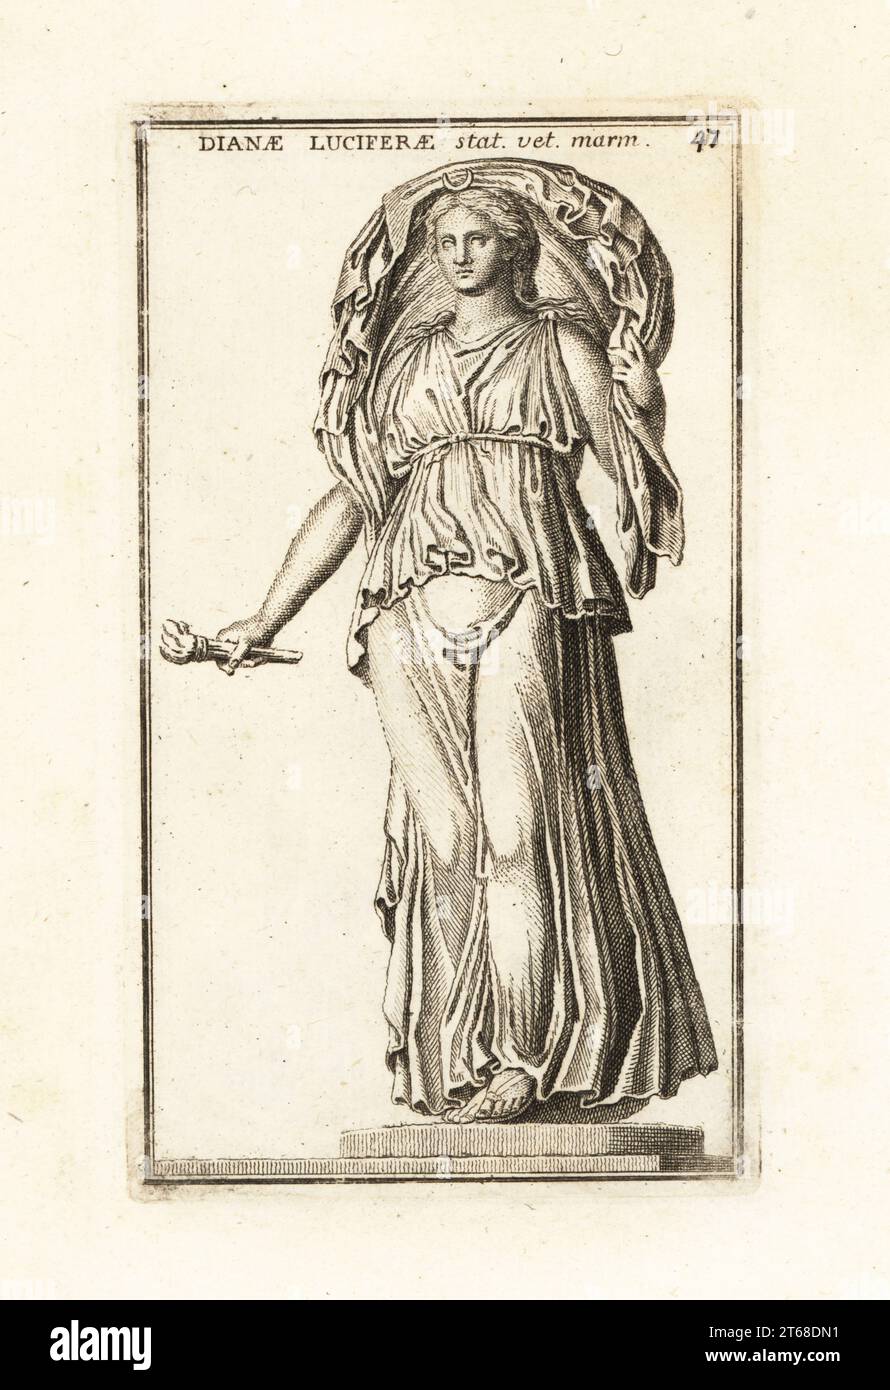 Statue of Roman moon goddess Luna holding a torch, wearing a billowing chiton, a crescent moon in her hair. Roman copy of a 4th century BC Greek statue of Selene. Also known as Diana Lucifera. Dianae Luciferae statua vetus marmorea. Copperplate engraving by Giovanni Battista Cannetti from Copperplates of the most beautiful ancient statues of Rome, Calcografia di piu belle statue antiche a Roma, engraved by Cannetti all'Arco della Ciambella, published by Gaetano Quojani, Rome, 1779. Stock Photo